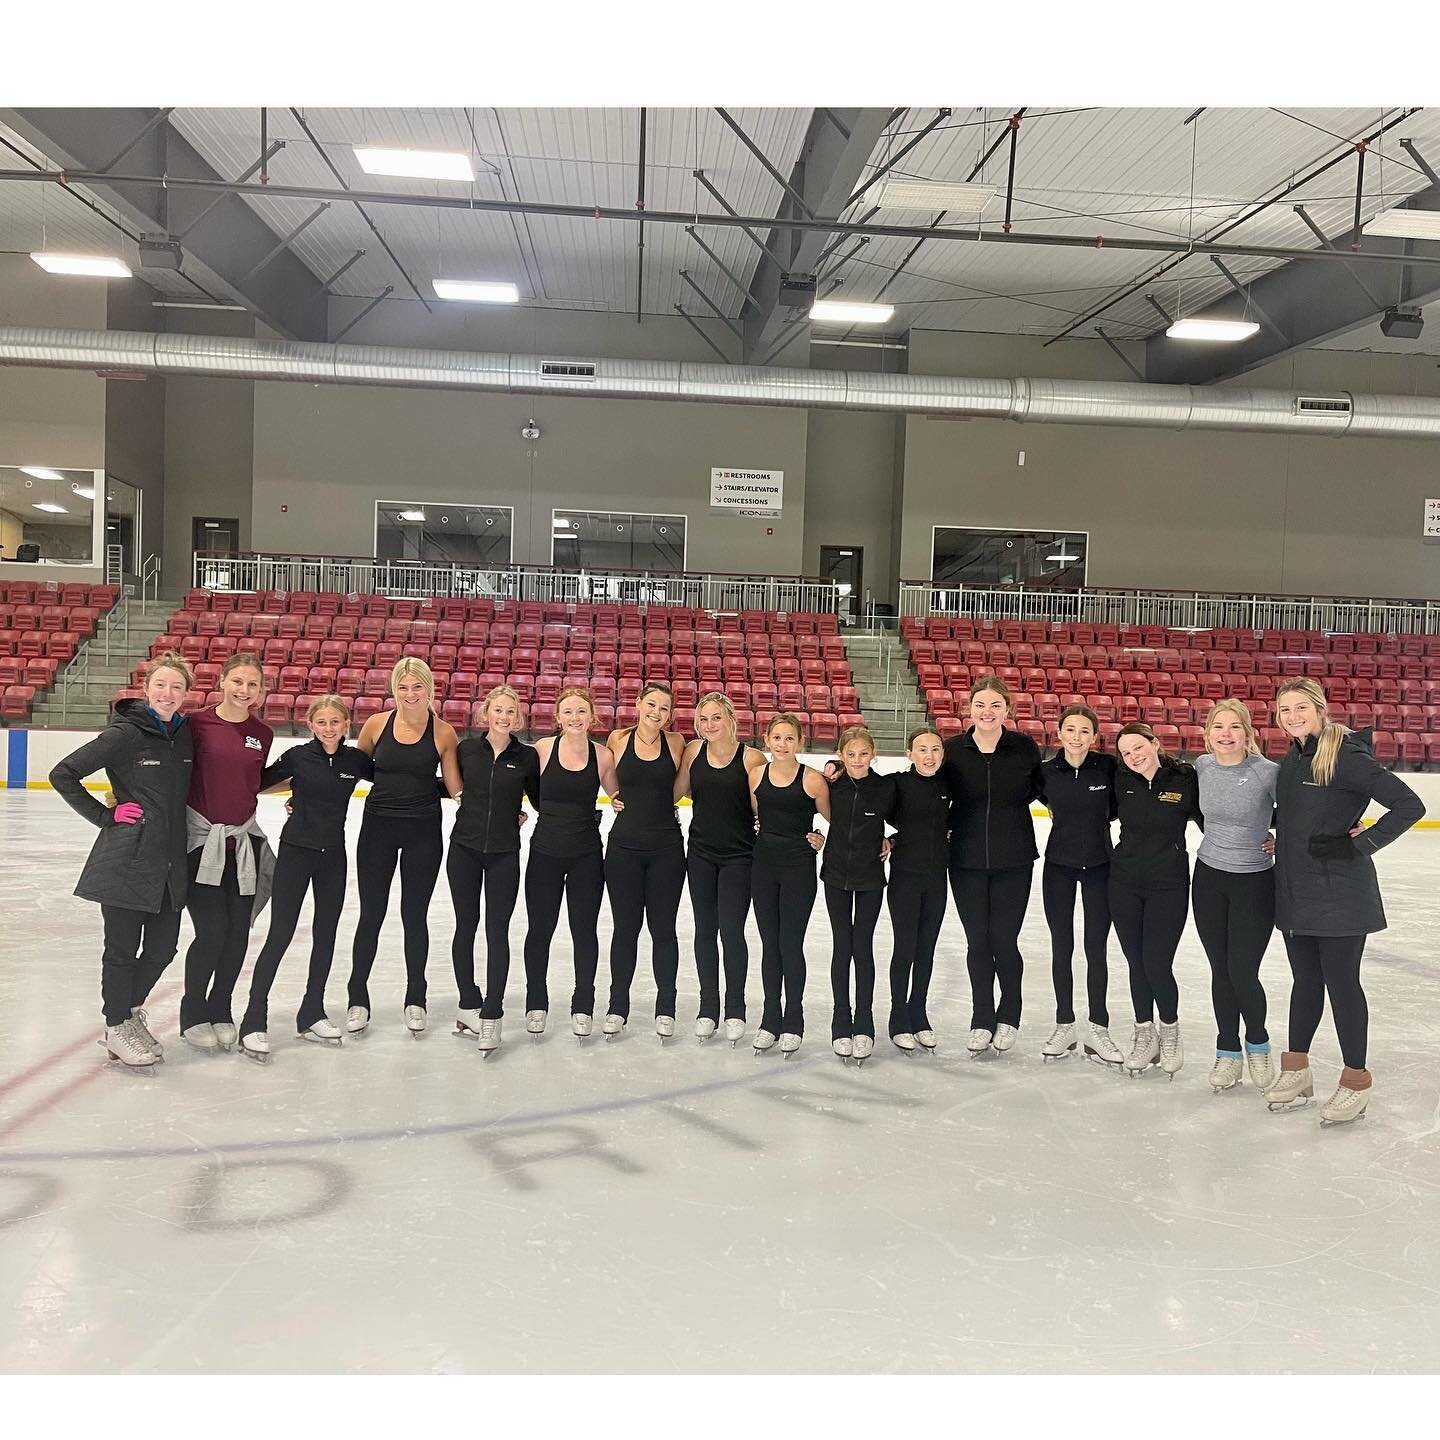 Our Figure Skating -Skating Skills- camp has come to a close. What a great two days with these athletes! 

More later, but thank you athletes and parents for trusting us with developing skating skills in your athlete. 

Thank you to Chris with Choice